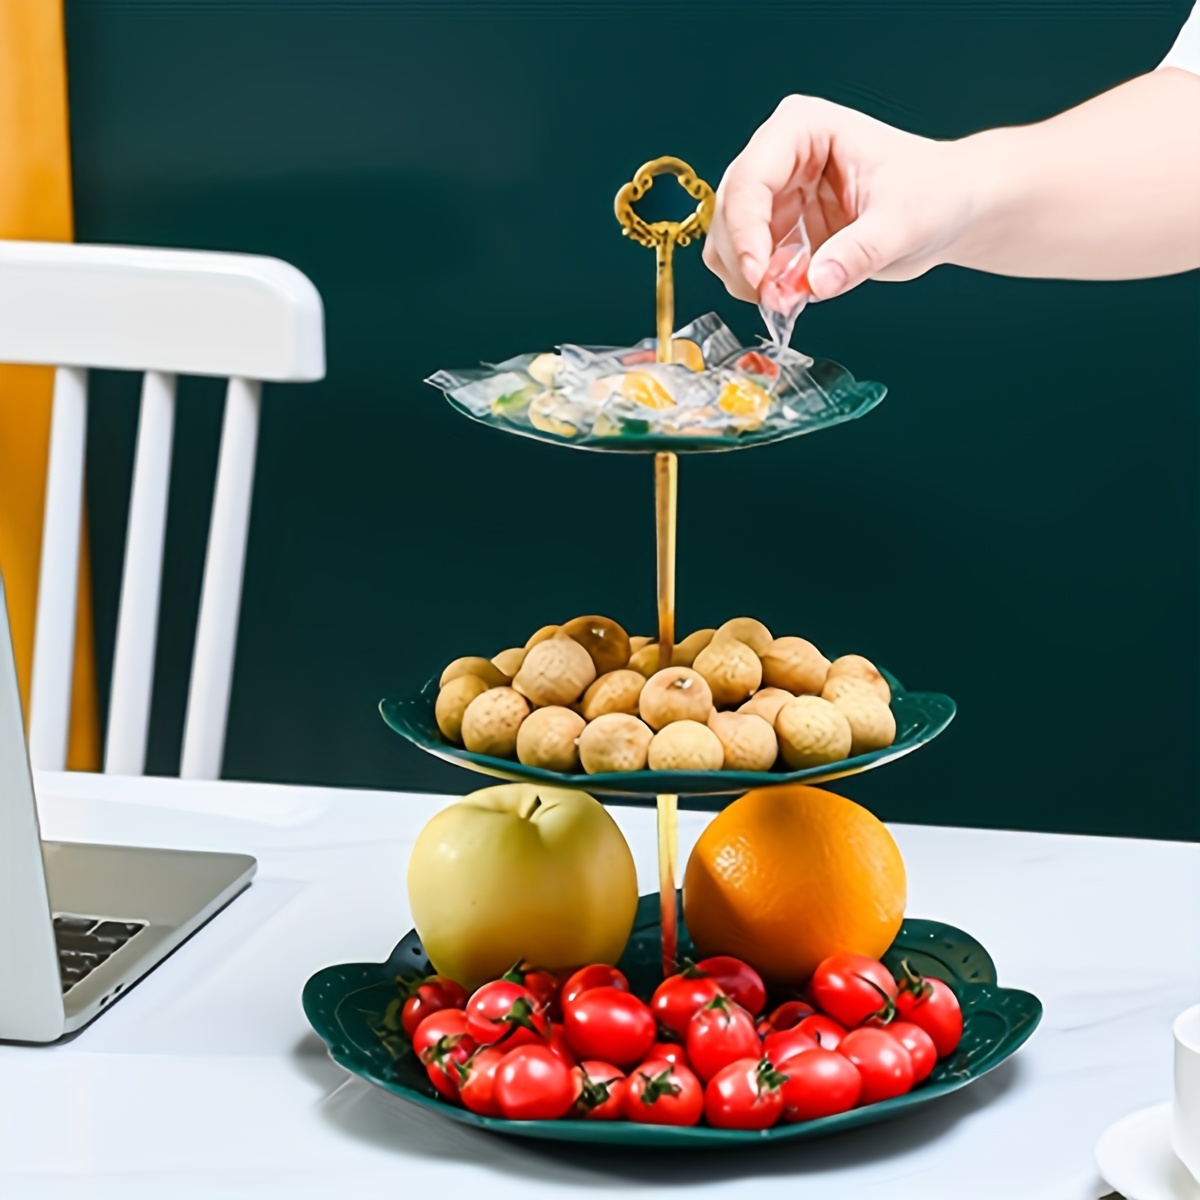 

3-tier Plastic Dessert Stand - Perfect For Birthday Parties, Afternoon Tea & Snacks | Durable Fruit & Cake Display Tray